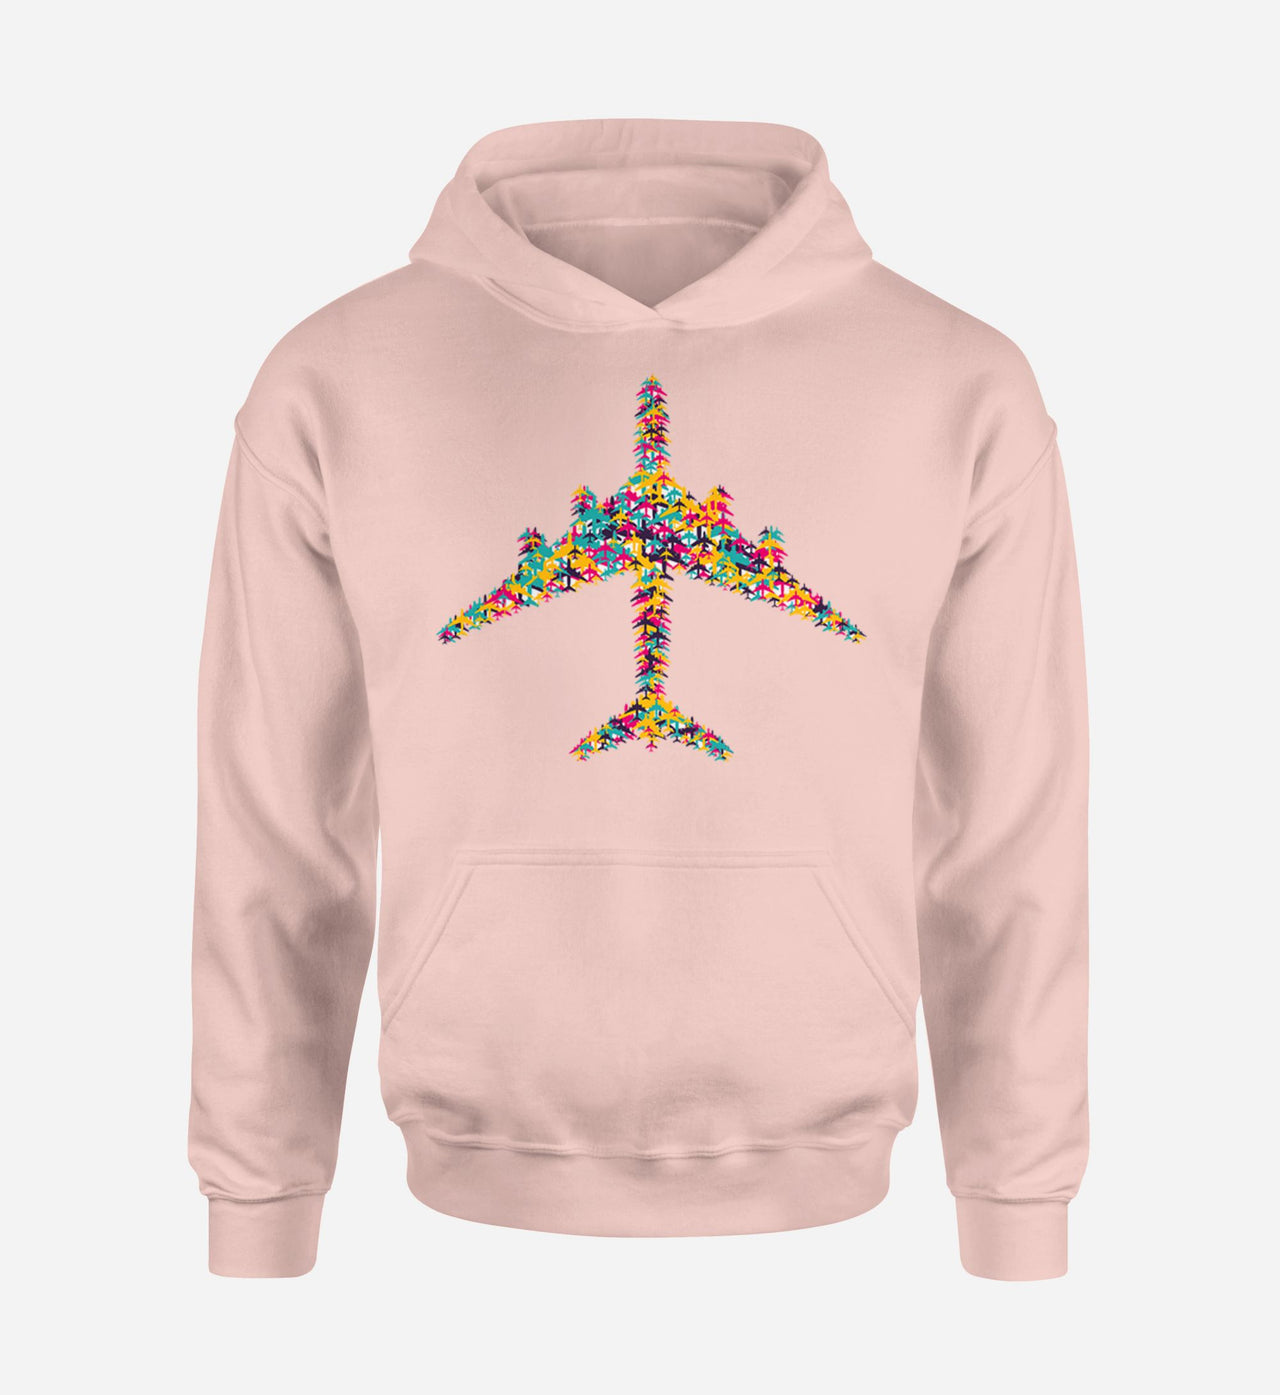 Colourful Airplane Designed Hoodies